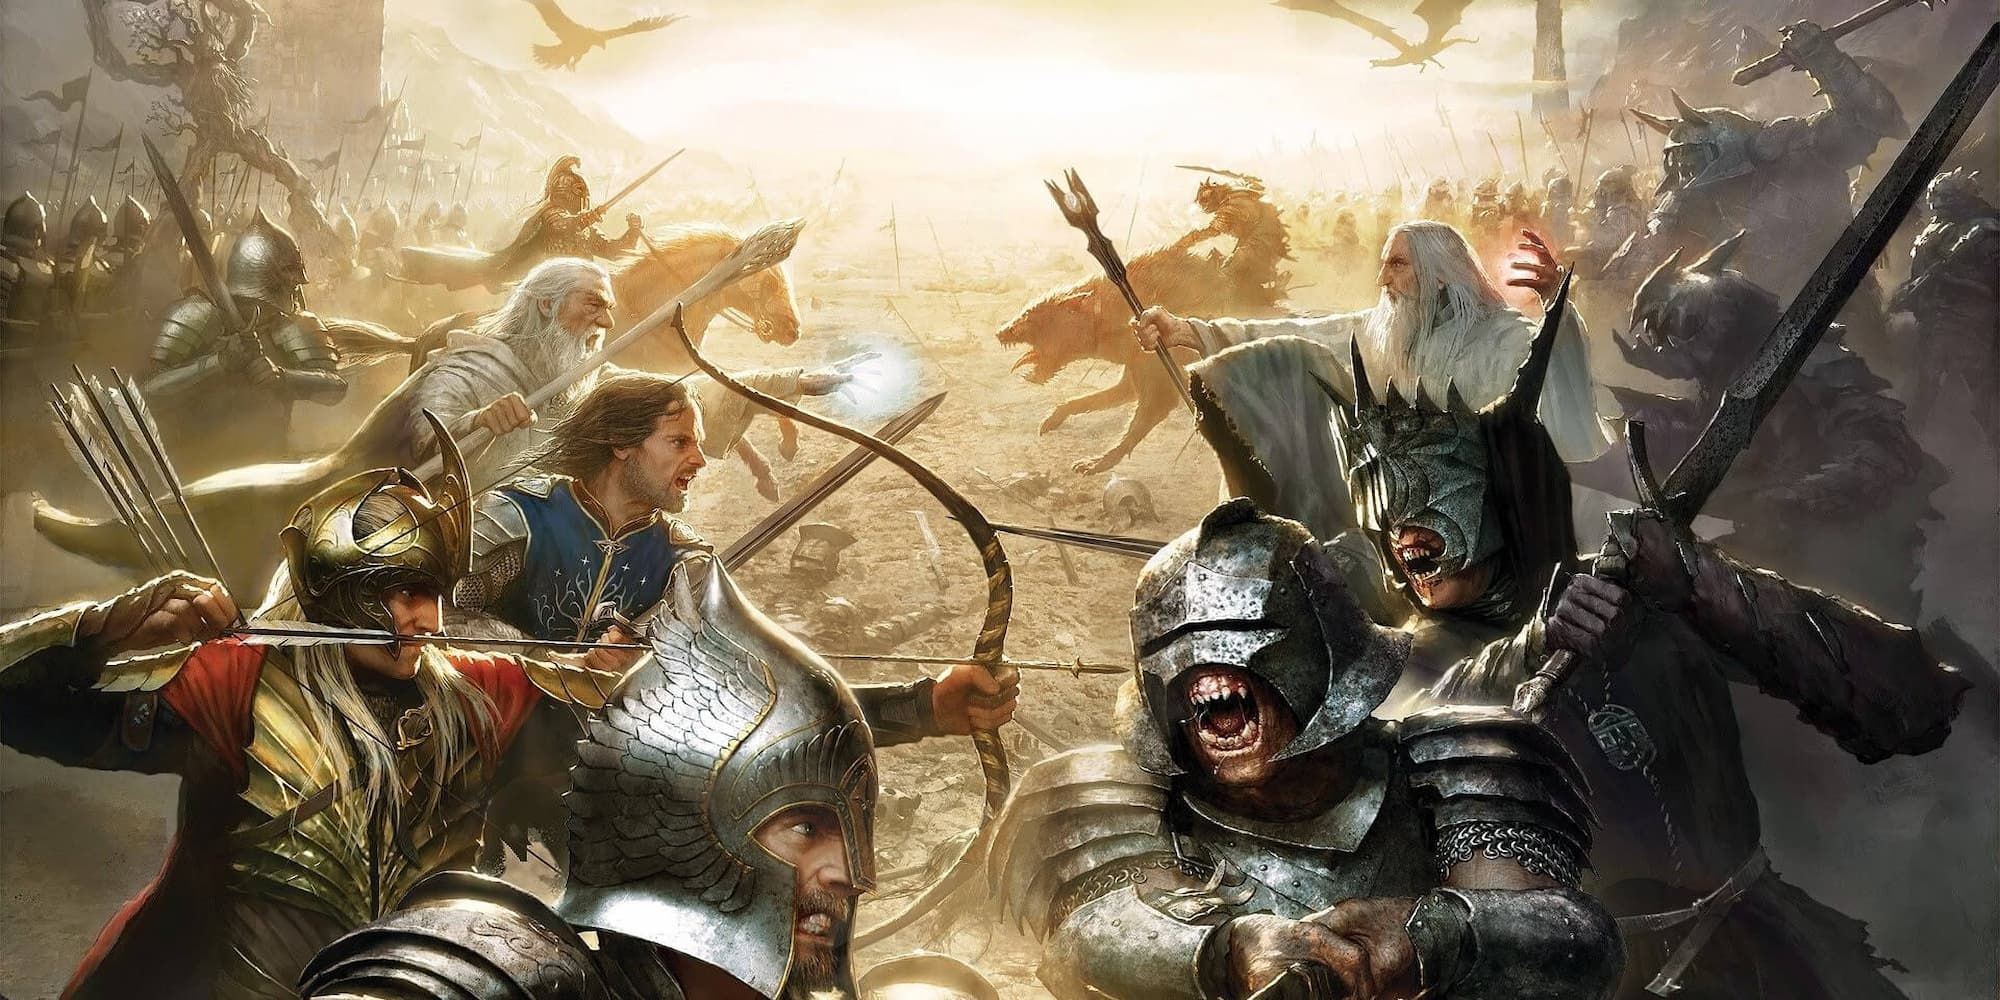 Cover image of the LOTR conquest